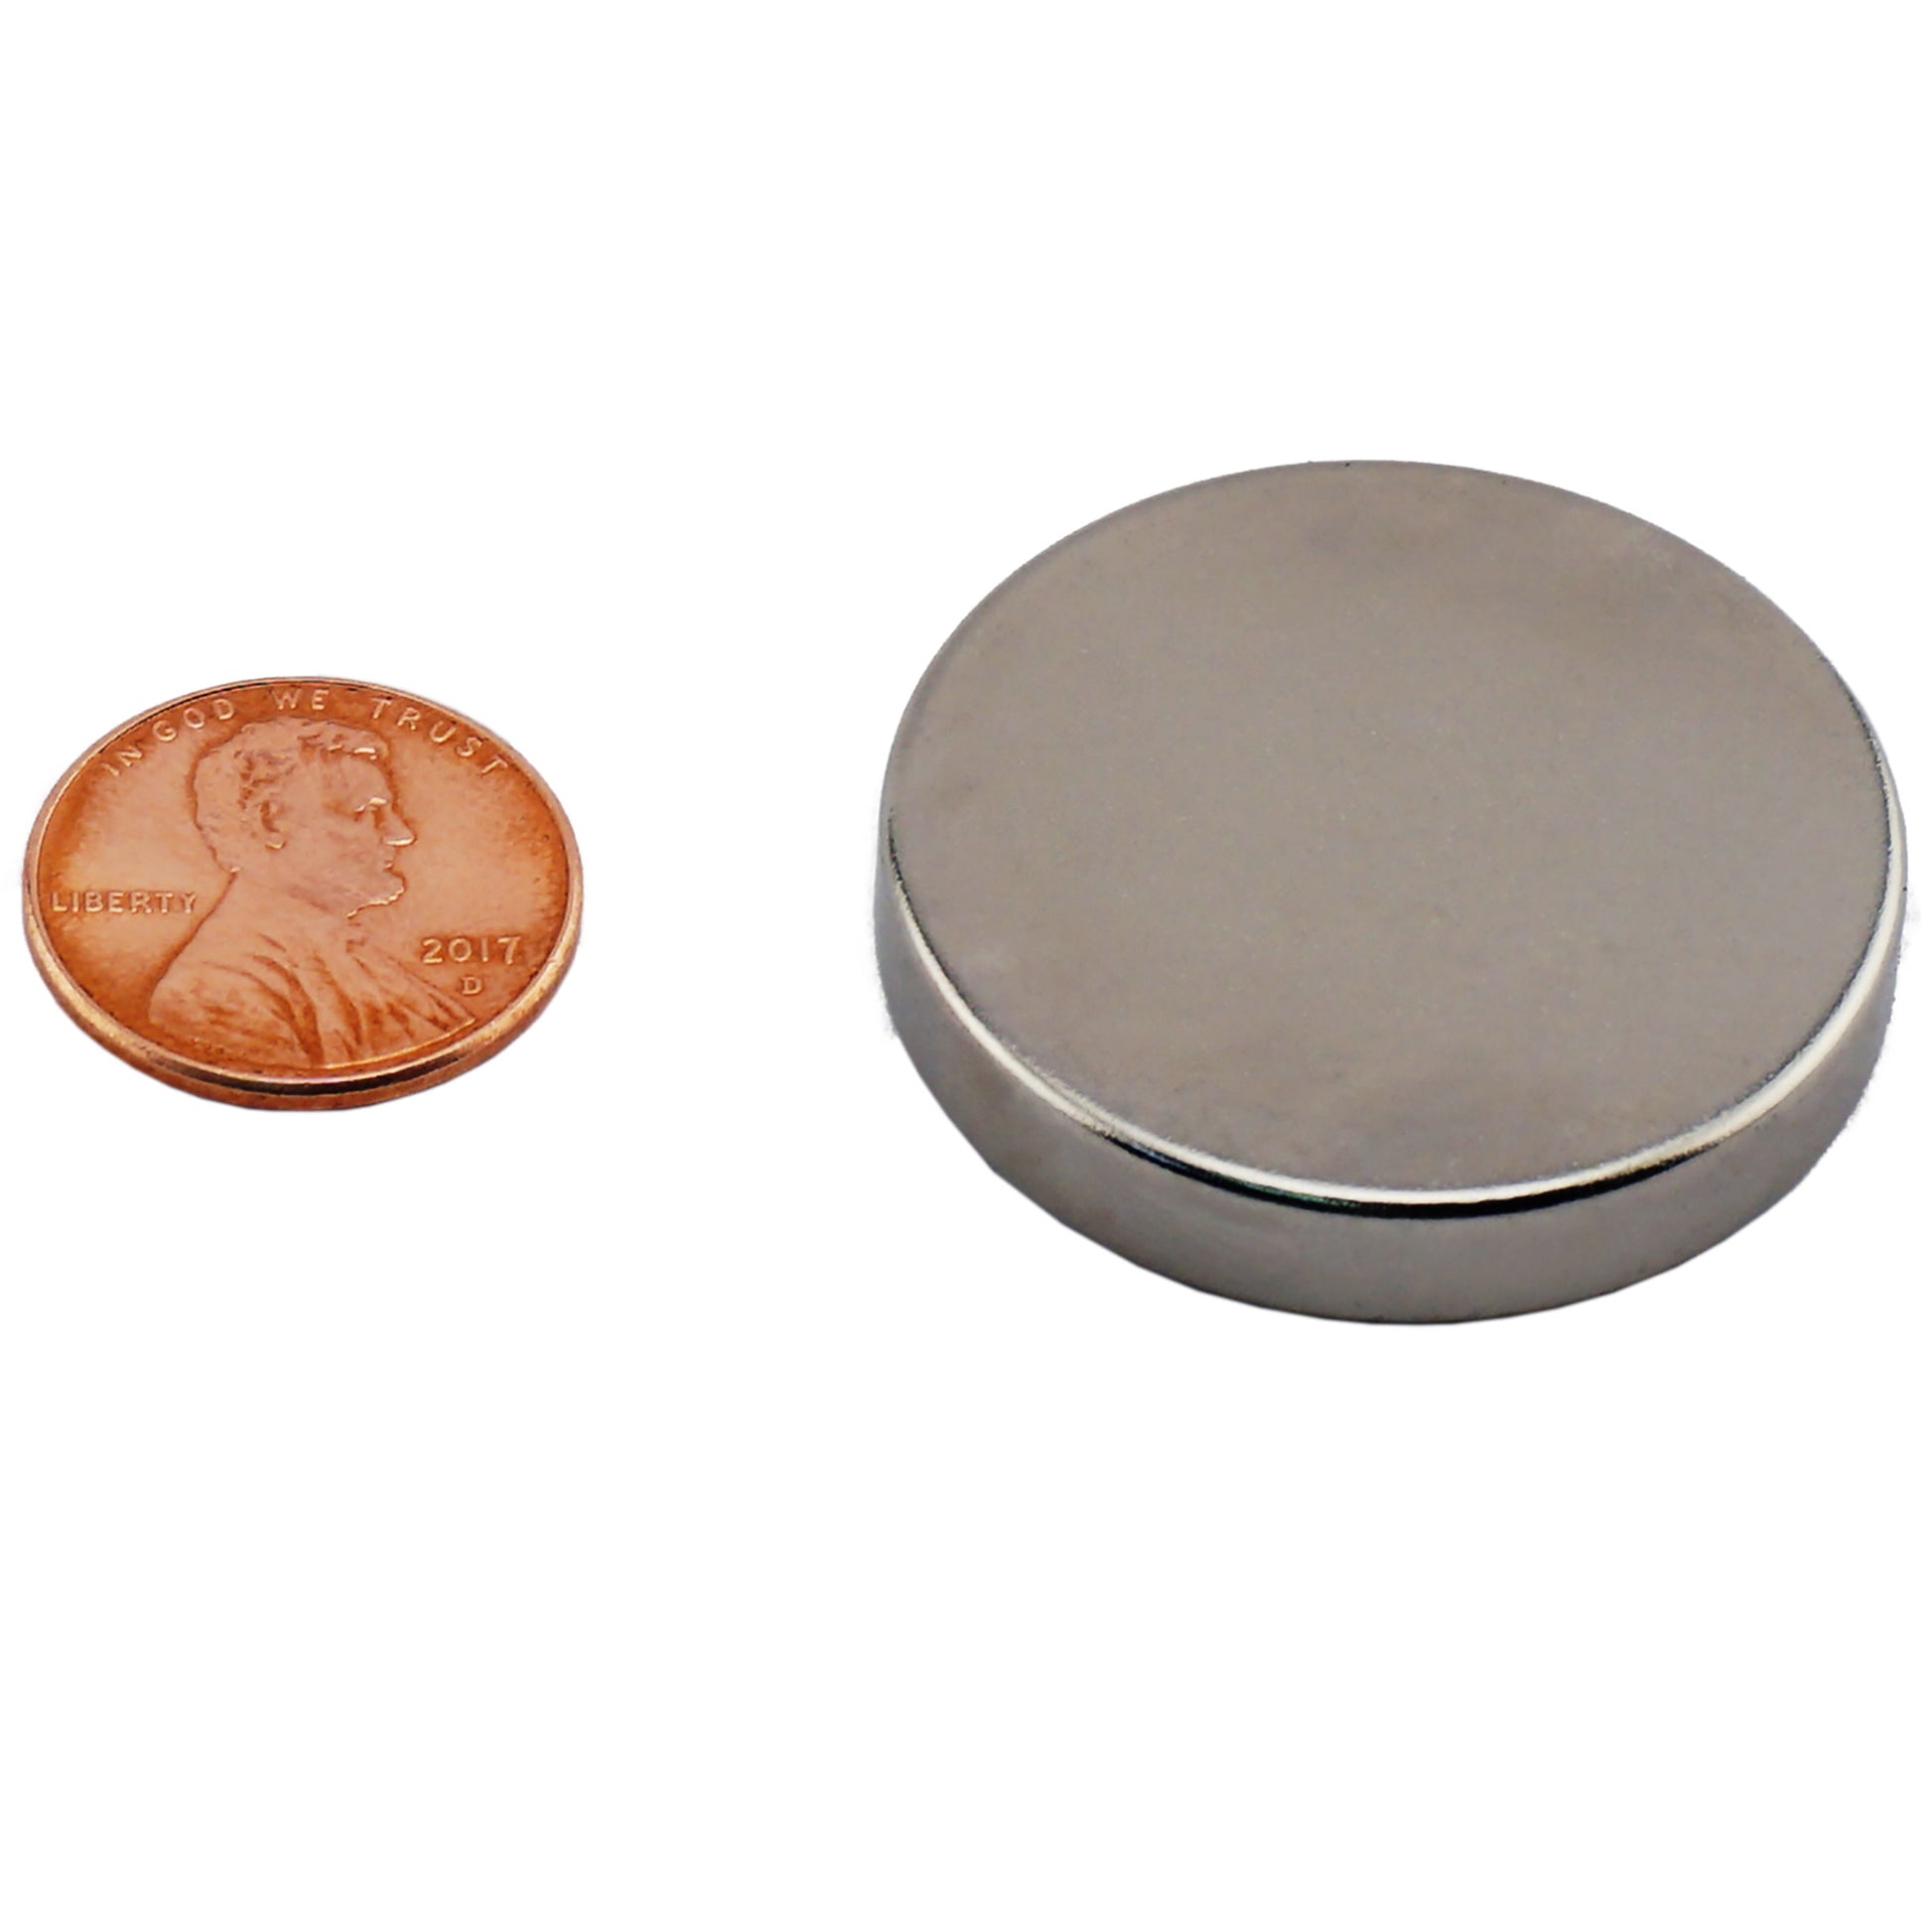 Load image into Gallery viewer, ND013702N Neodymium Disc Magnet - Compared to Penny for Size Reference